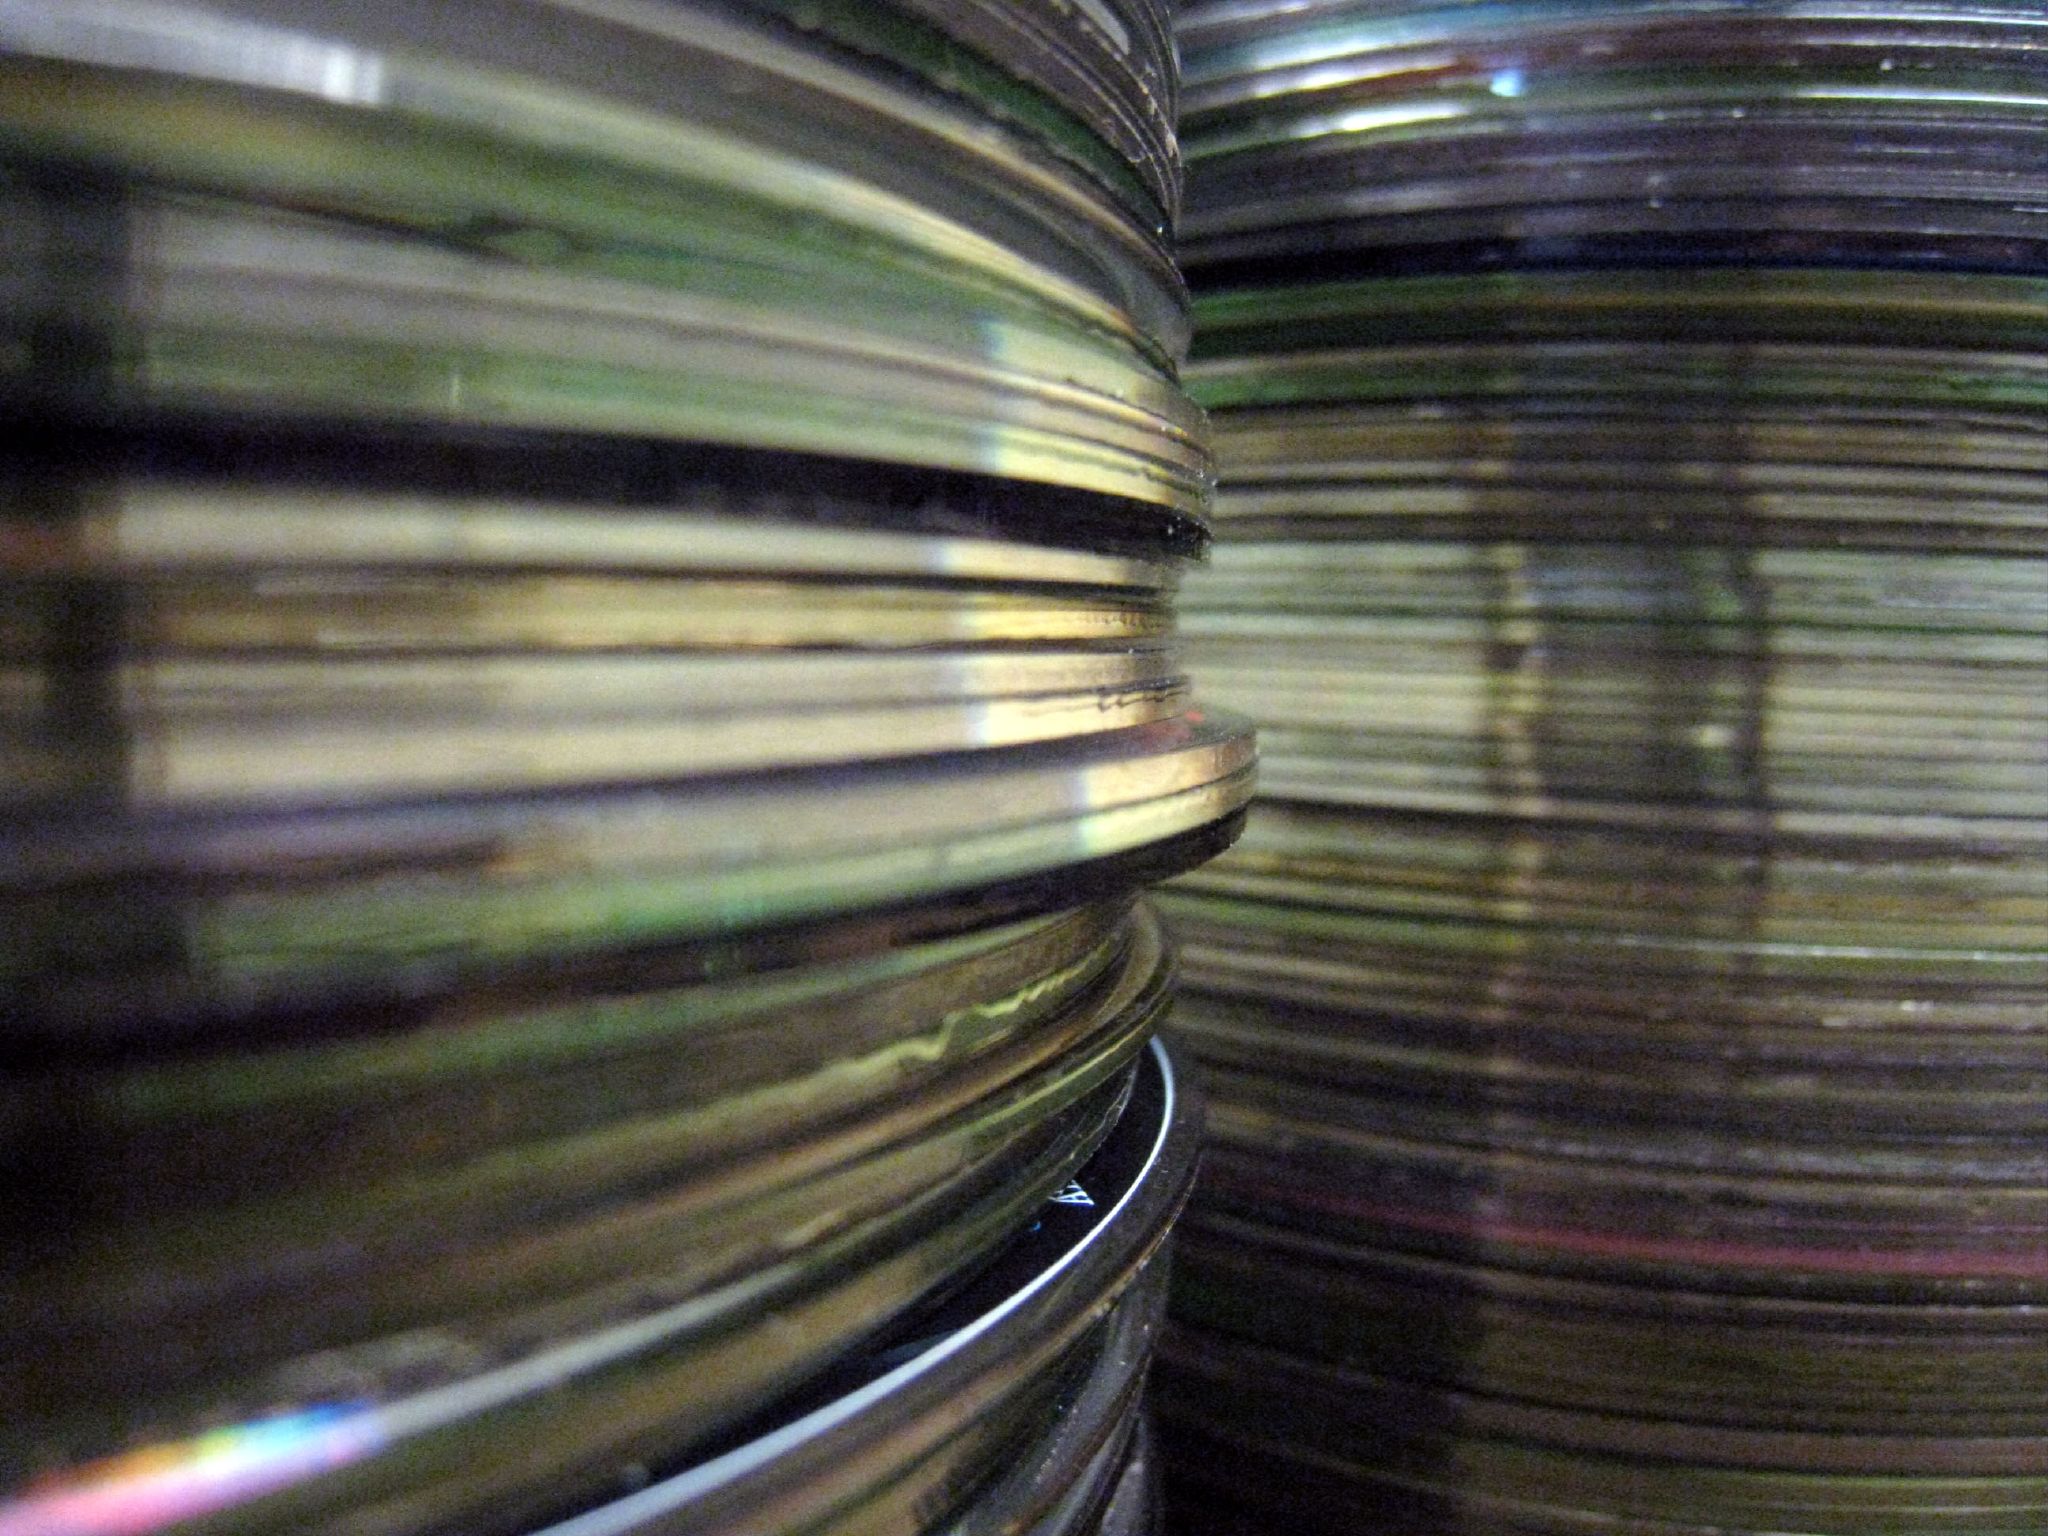 Stacks of CDs